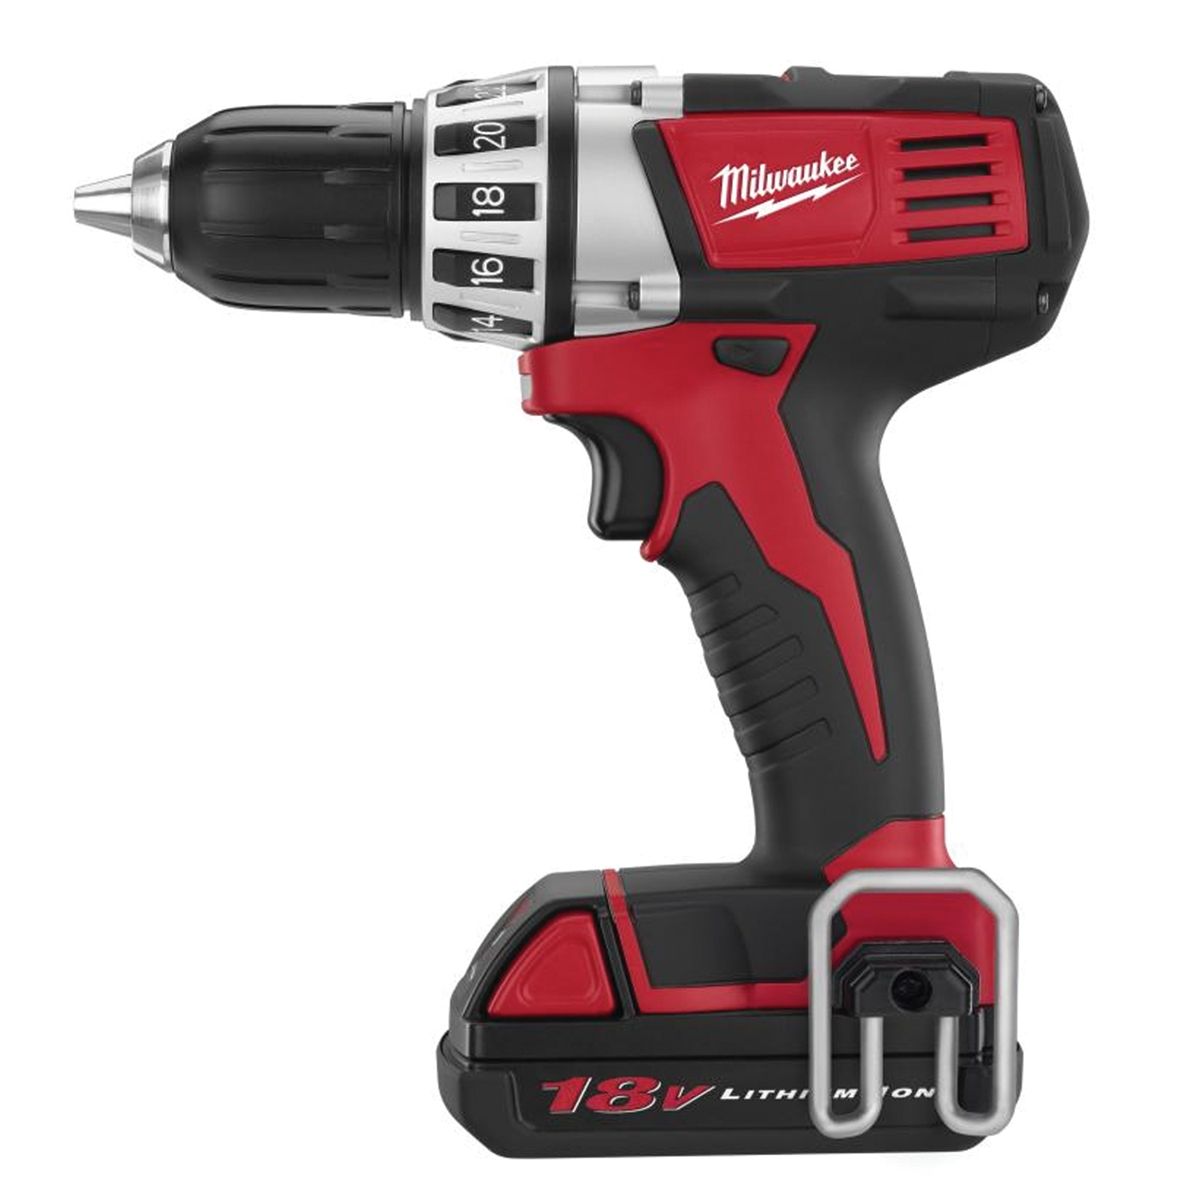 18V Lithium-Ion Cordless Compact Impact Driver